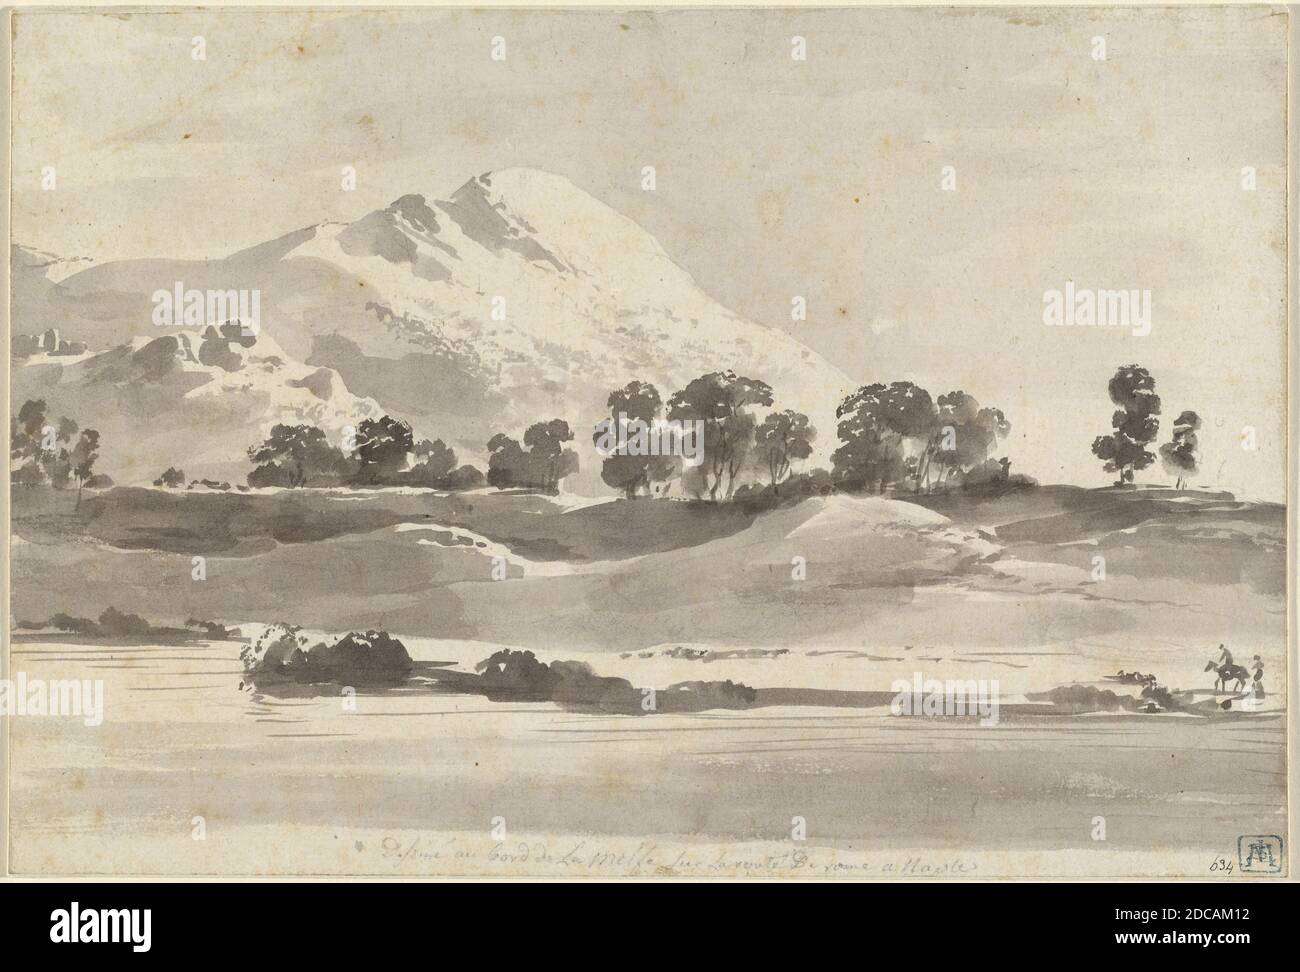 Jean-Jacques de Boissieu, (artist), French, 1736 - 1810, Mount Cairo from across the Melfa River, c. 1765/1766, brush and gray wash on laid paper; laid down, overall: 16.1 x 23.9 cm (6 5/16 x 9 7/16 in Stock Photo